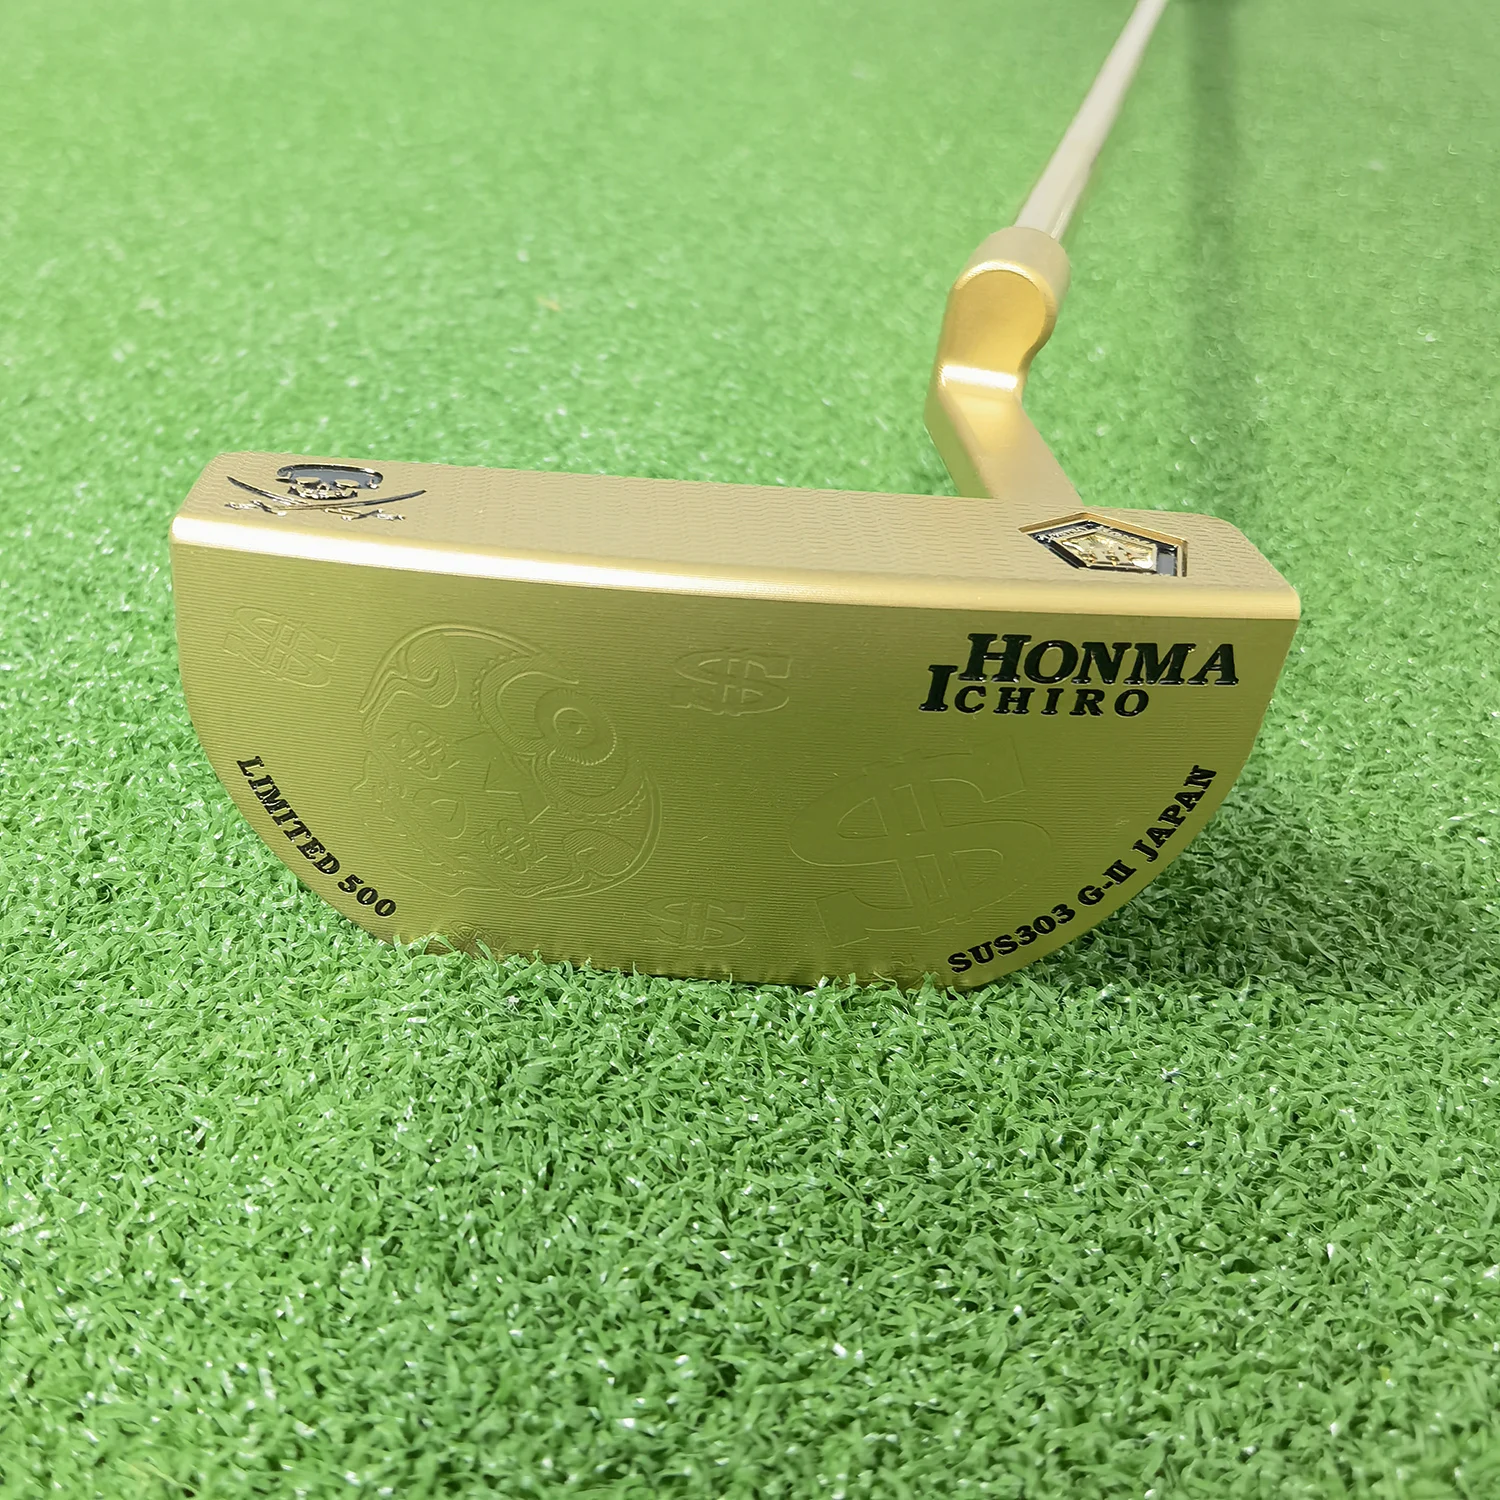 Original OEM ICHIRO HONMA Golf Clubs New Limited Edition G-II Semicircle Gold Putters 33/34/35inch with Shaft Headcover